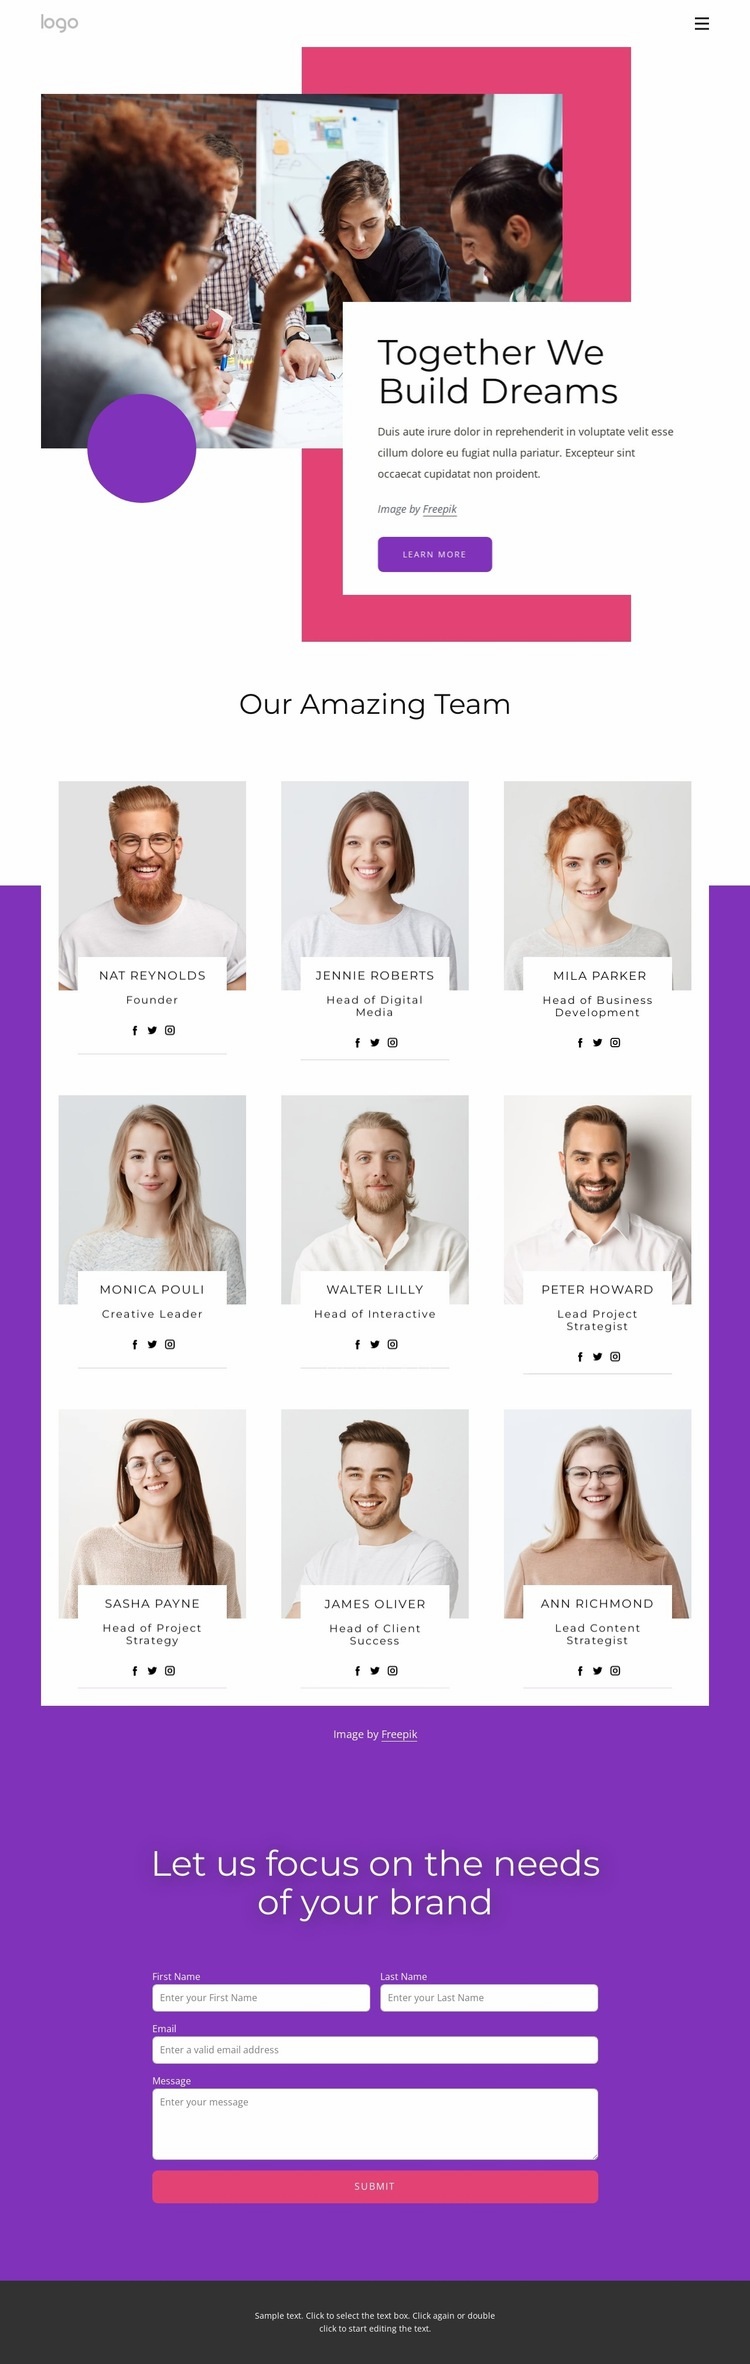 Together we build dreams Wix Template Alternative